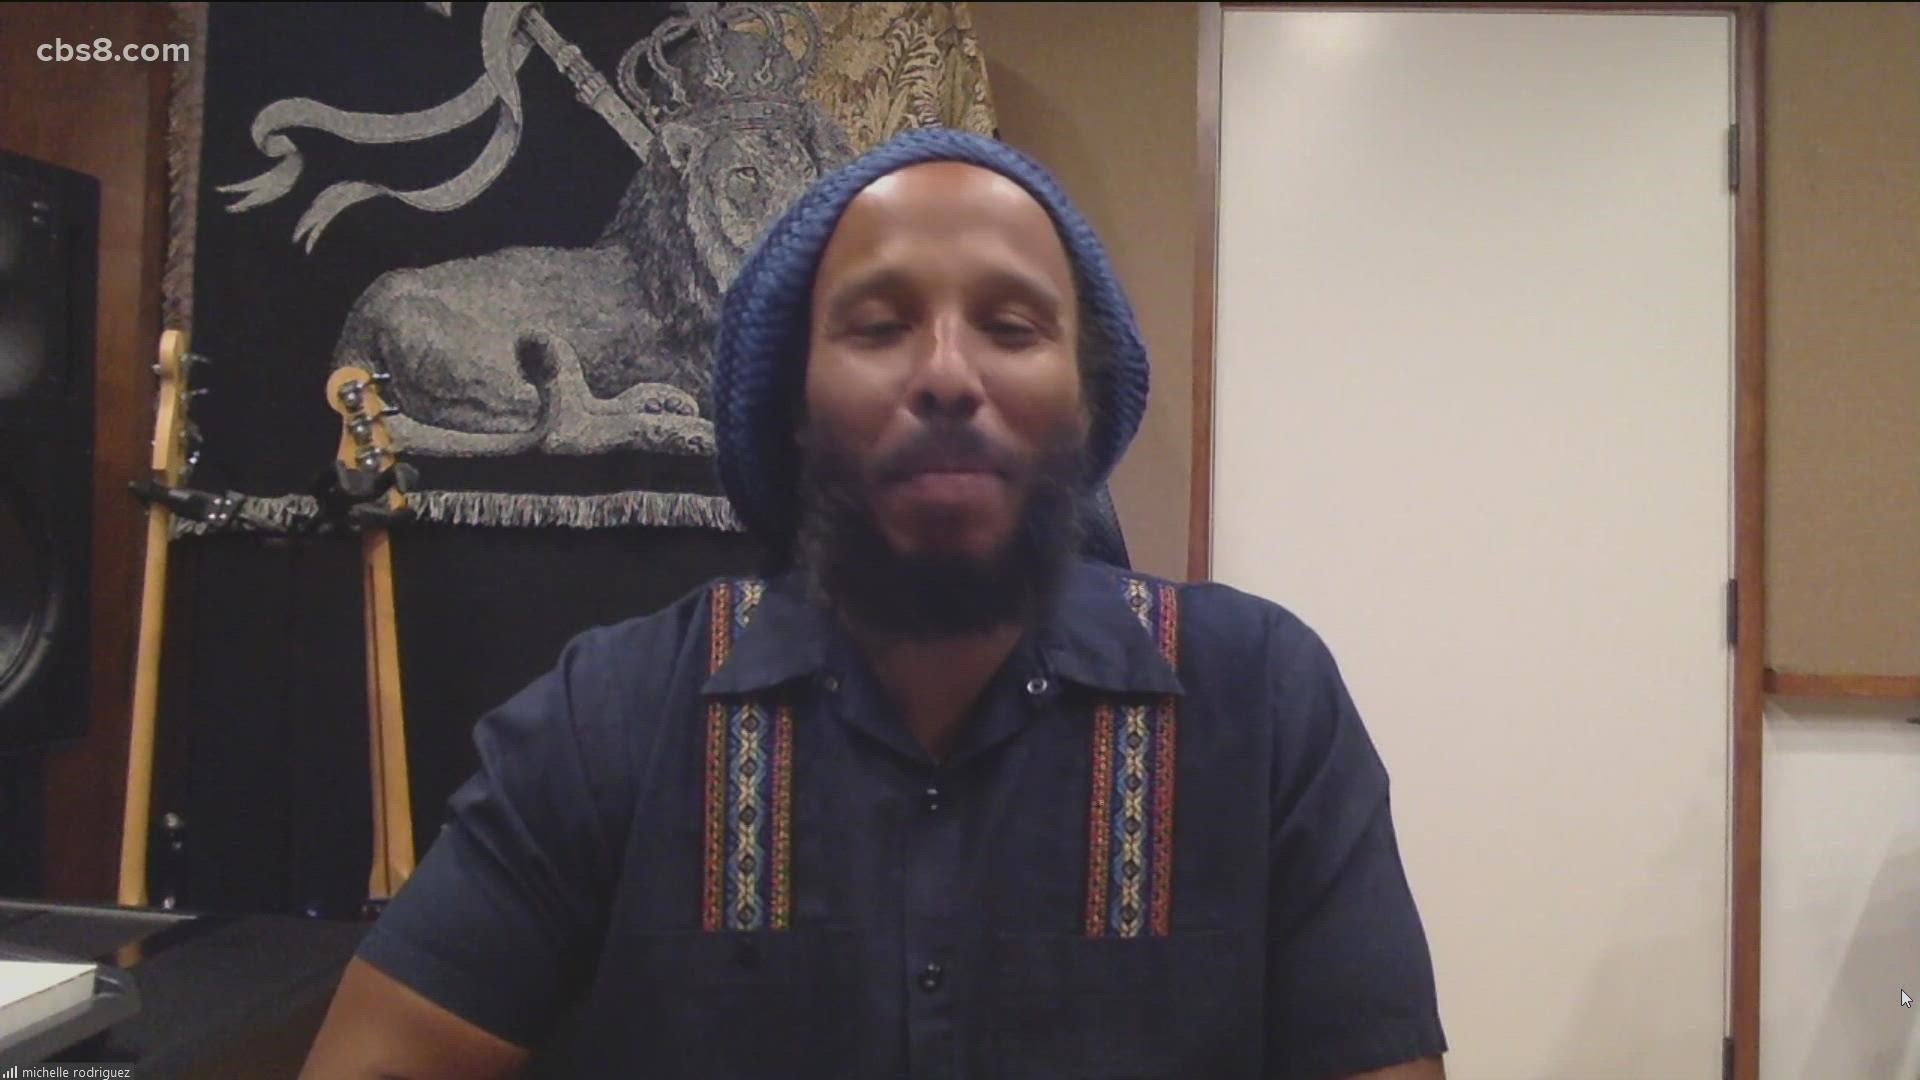 You probably know him for his music, but Ziggy Marley is also a successful children's book author. His latest is called "My Dog Romeo."